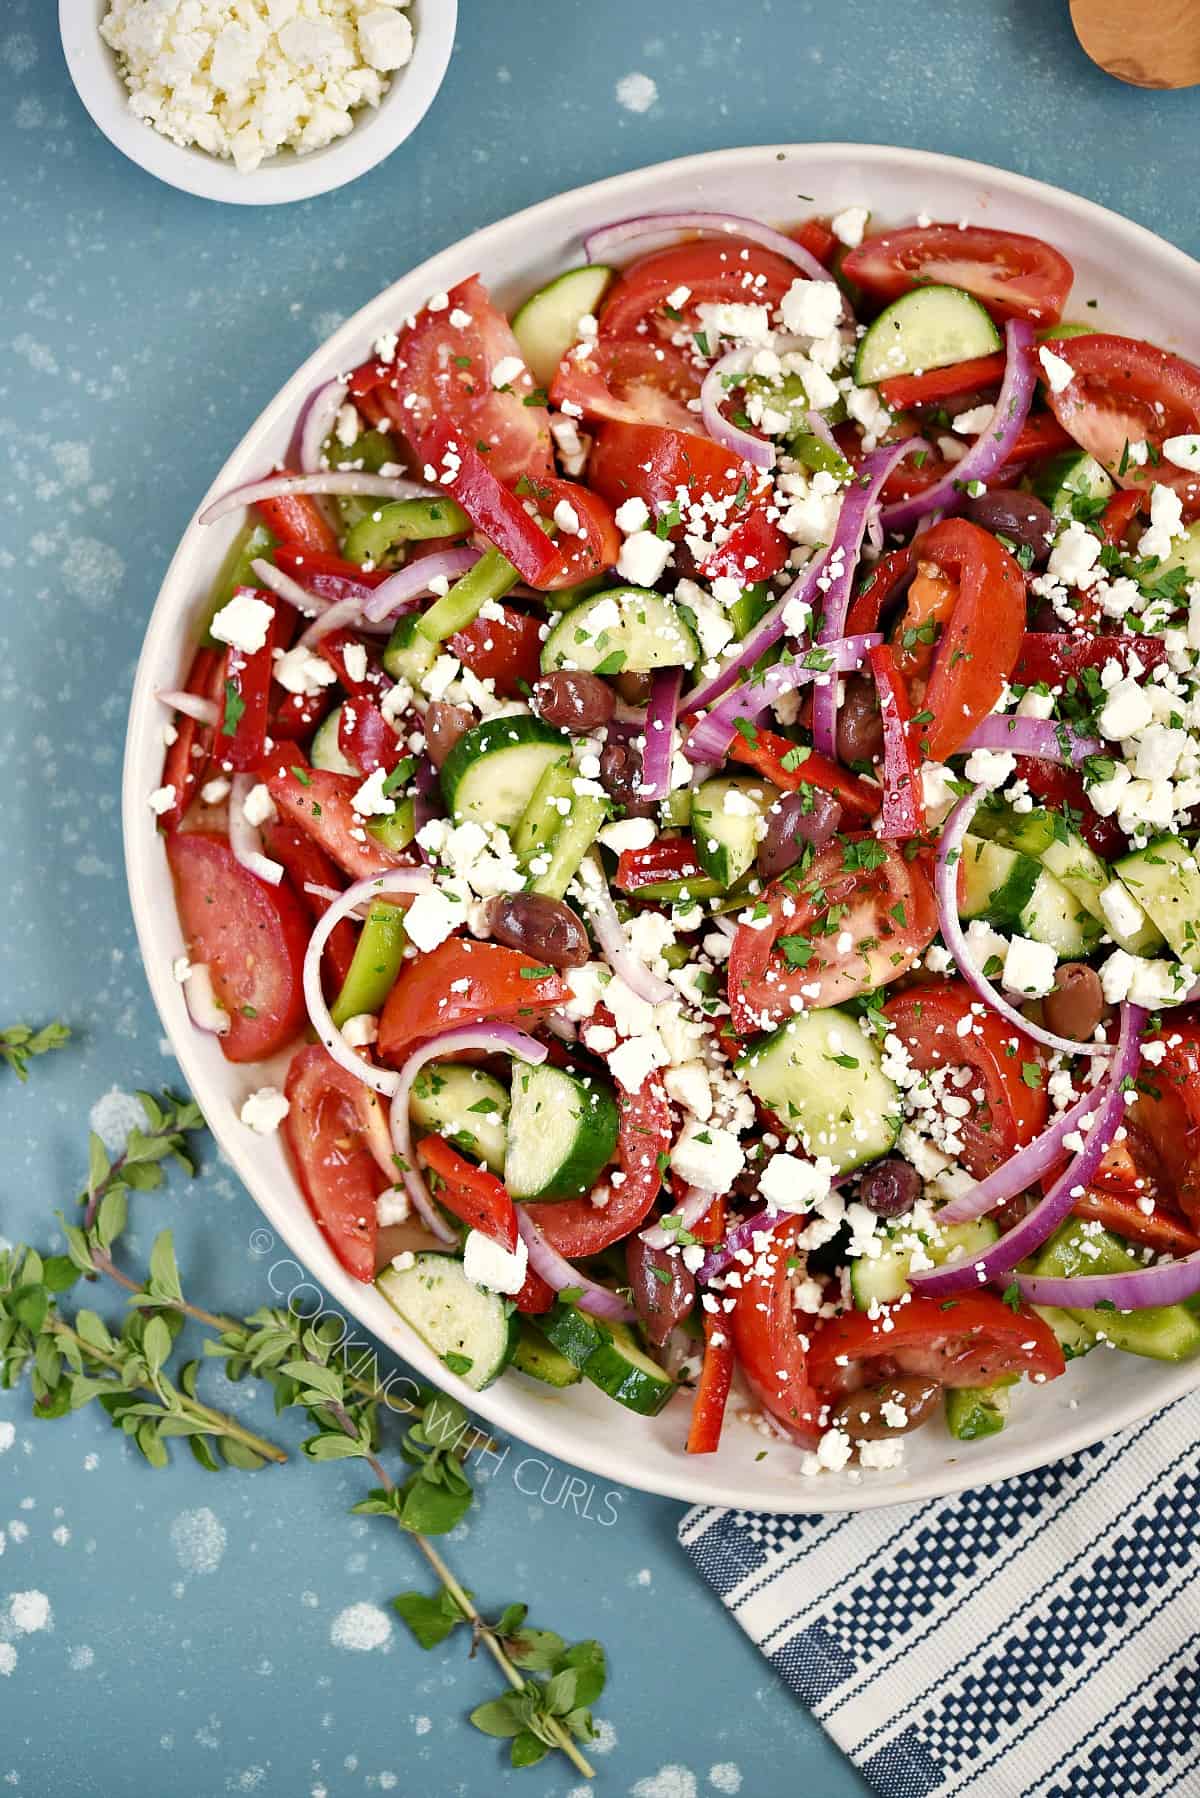 Looking down on a serving platter filled with tomato wedges, onion, bell pepper and cucumber slices sprinkled with feta cheese.